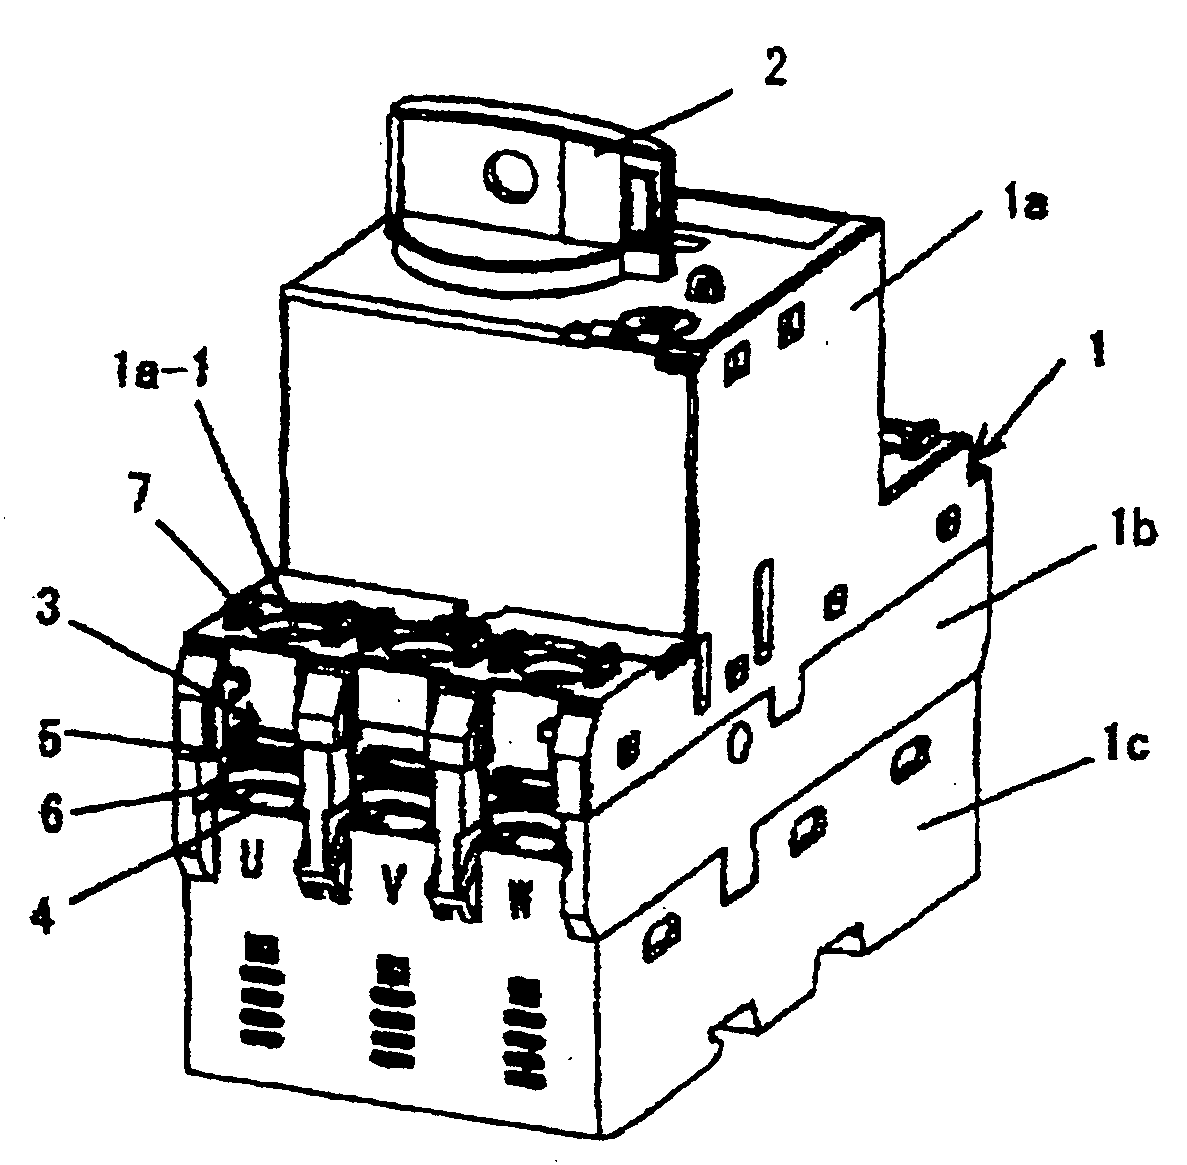 Terminal device of switching device